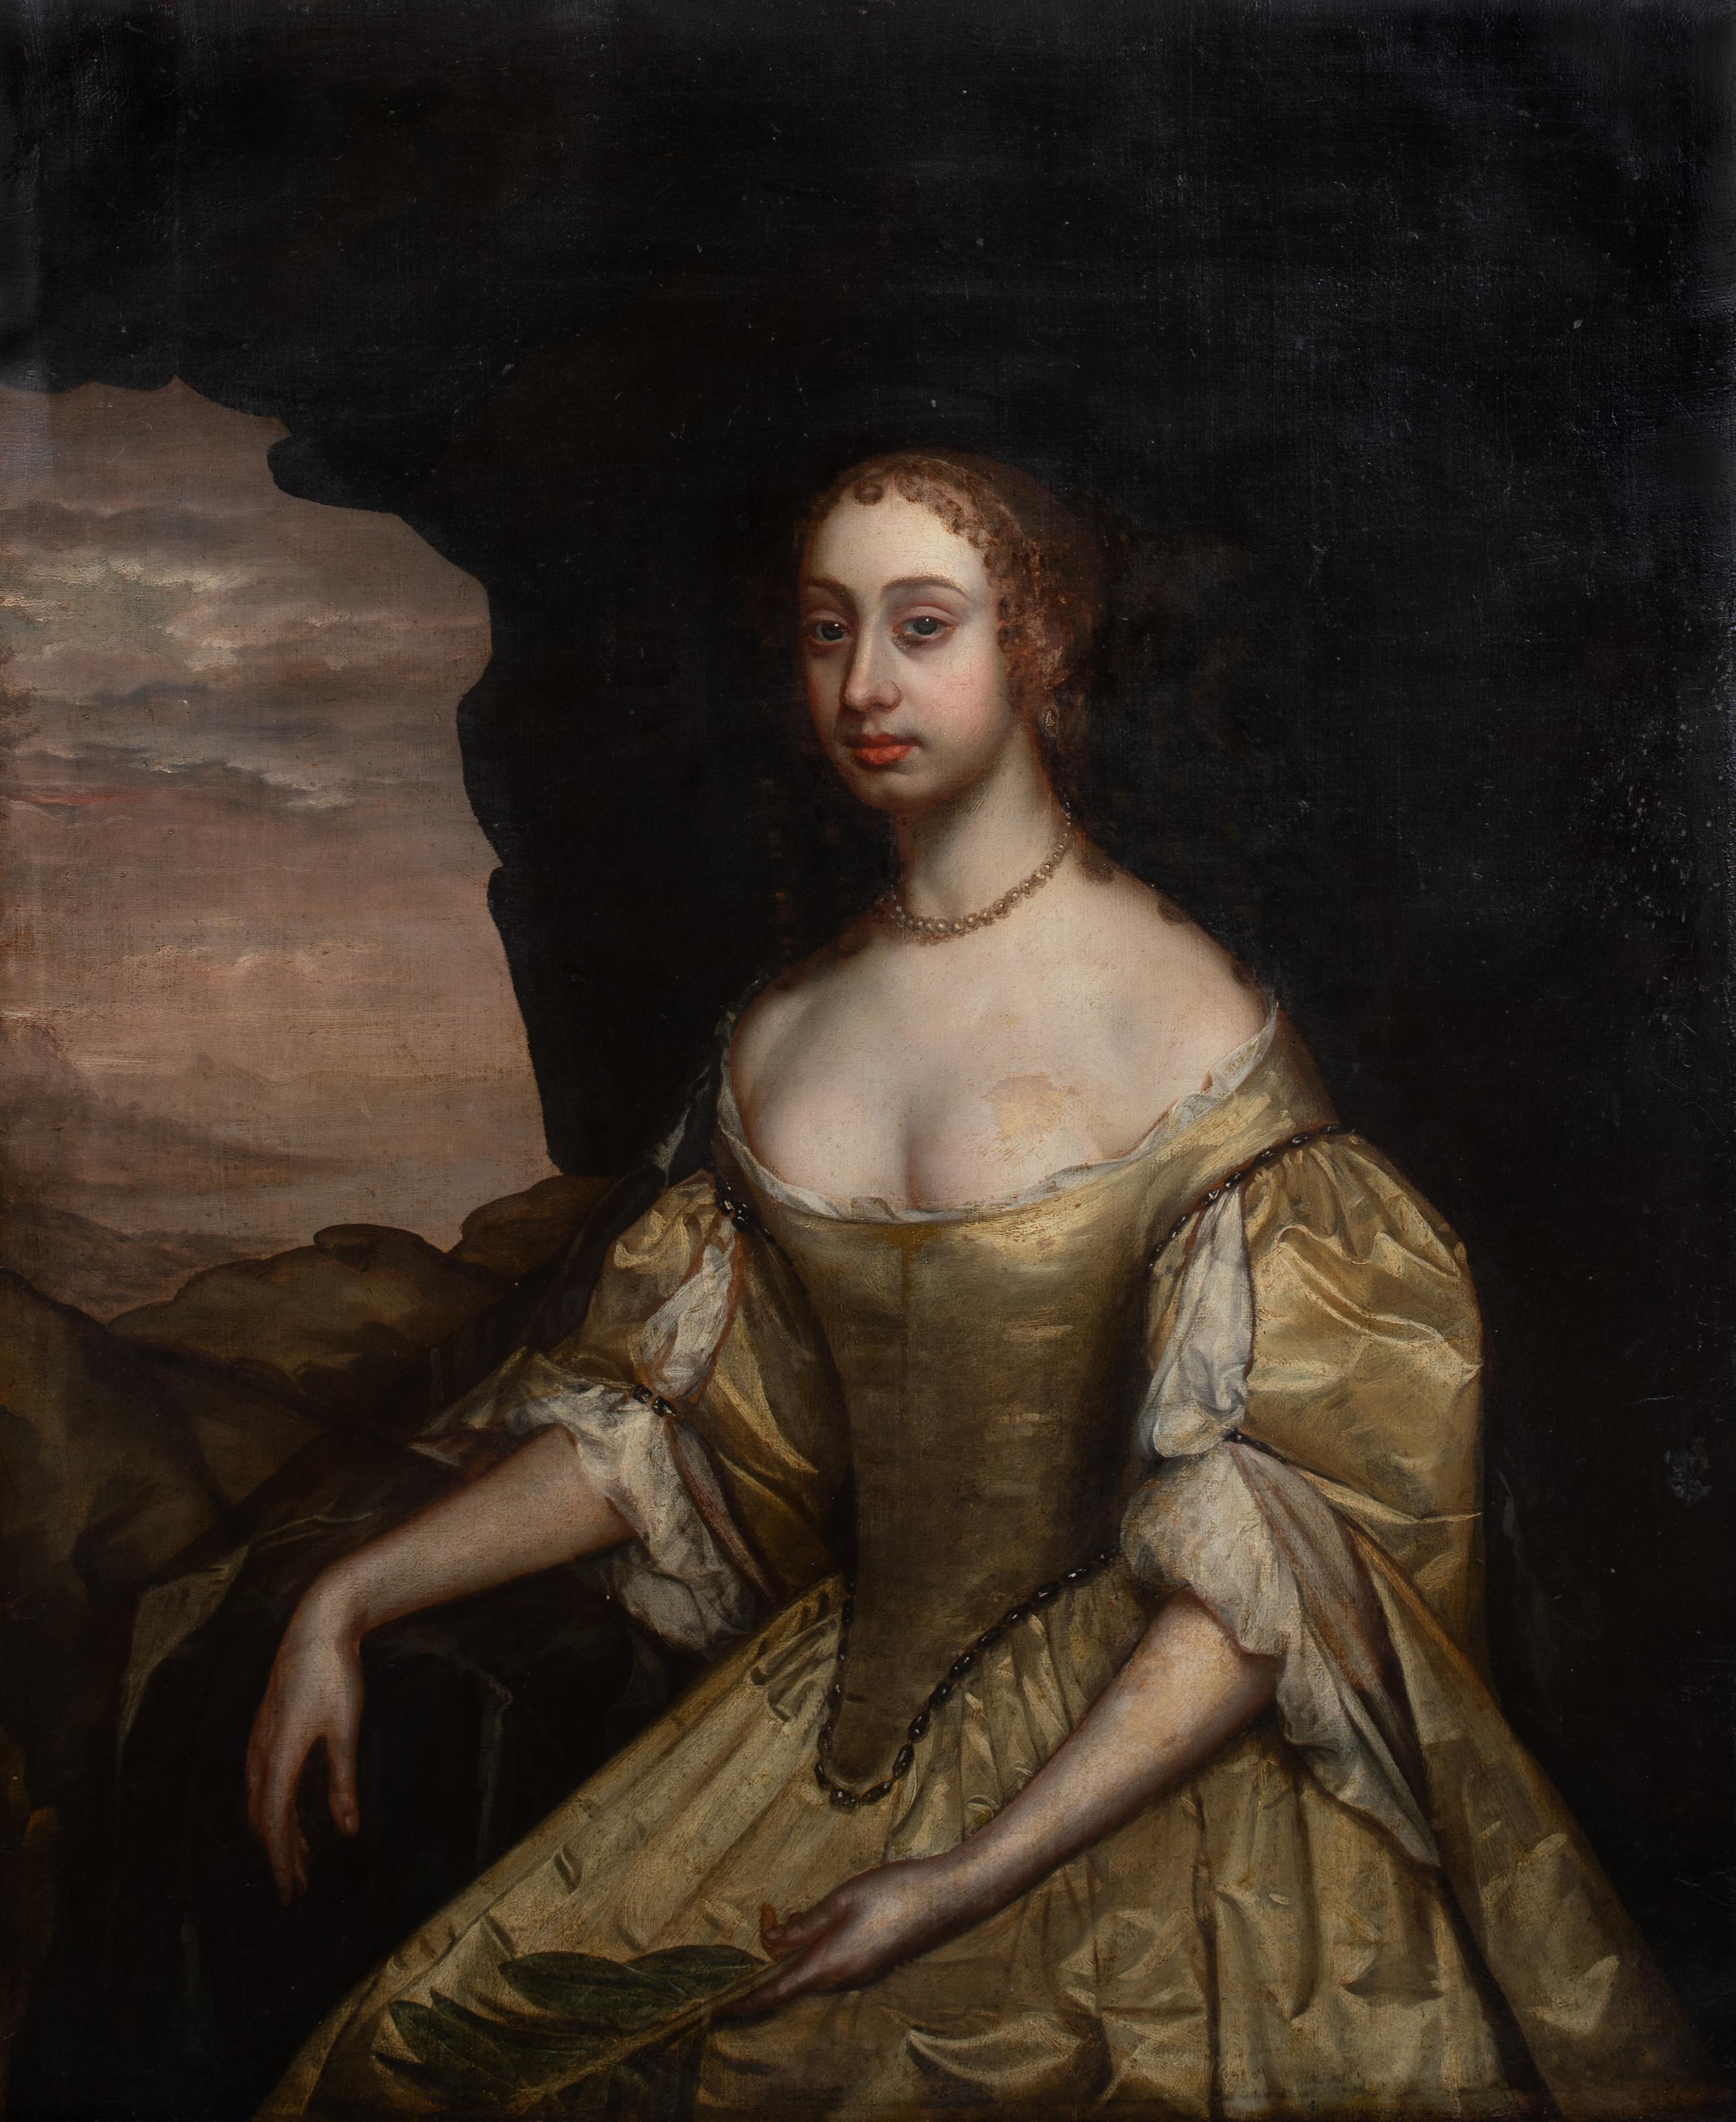 Portrait Of Katherine Stanhope, Countess of Chesterfield (1609–1667), 17th Century

circle of PETER LELY 1618-1680

Huge 17th Century Old Master portrait of Portrait Of Katherine Stanhope, Countess of Chesterfield (1609–1667), oil on canvas. Three